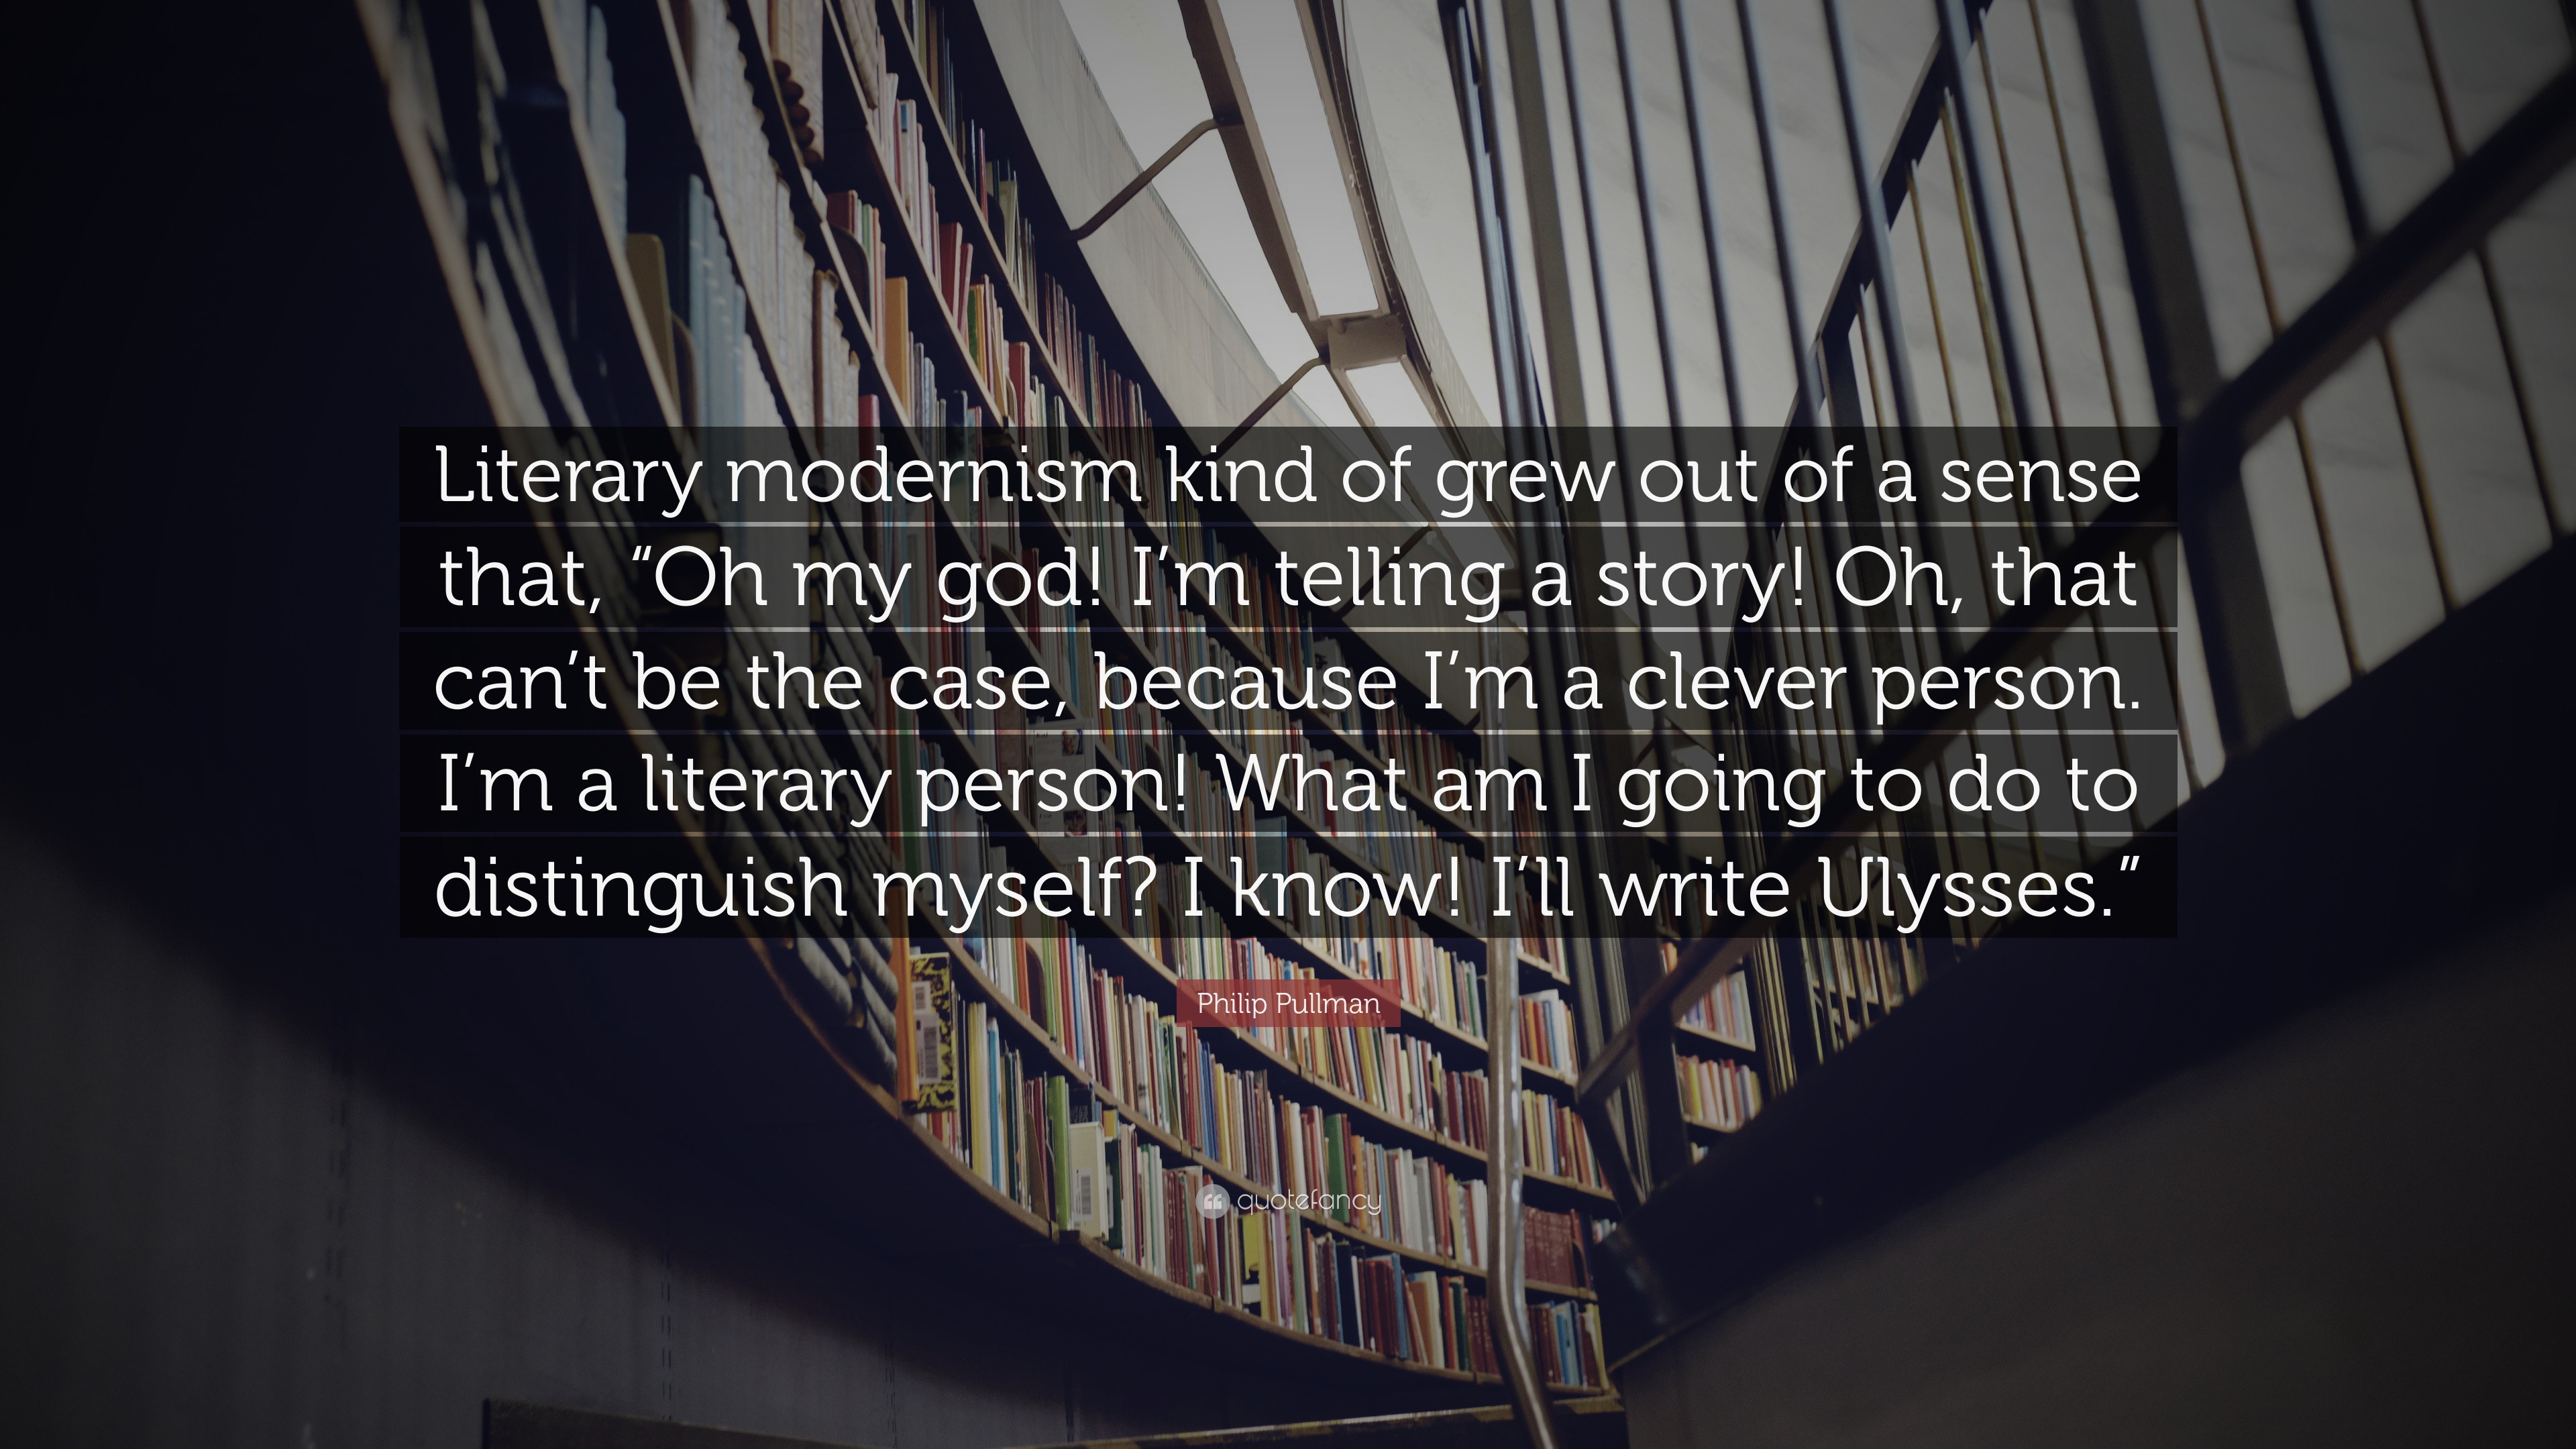 Philip Pullman Quote: “Literary modernism kind of grew out of a sense